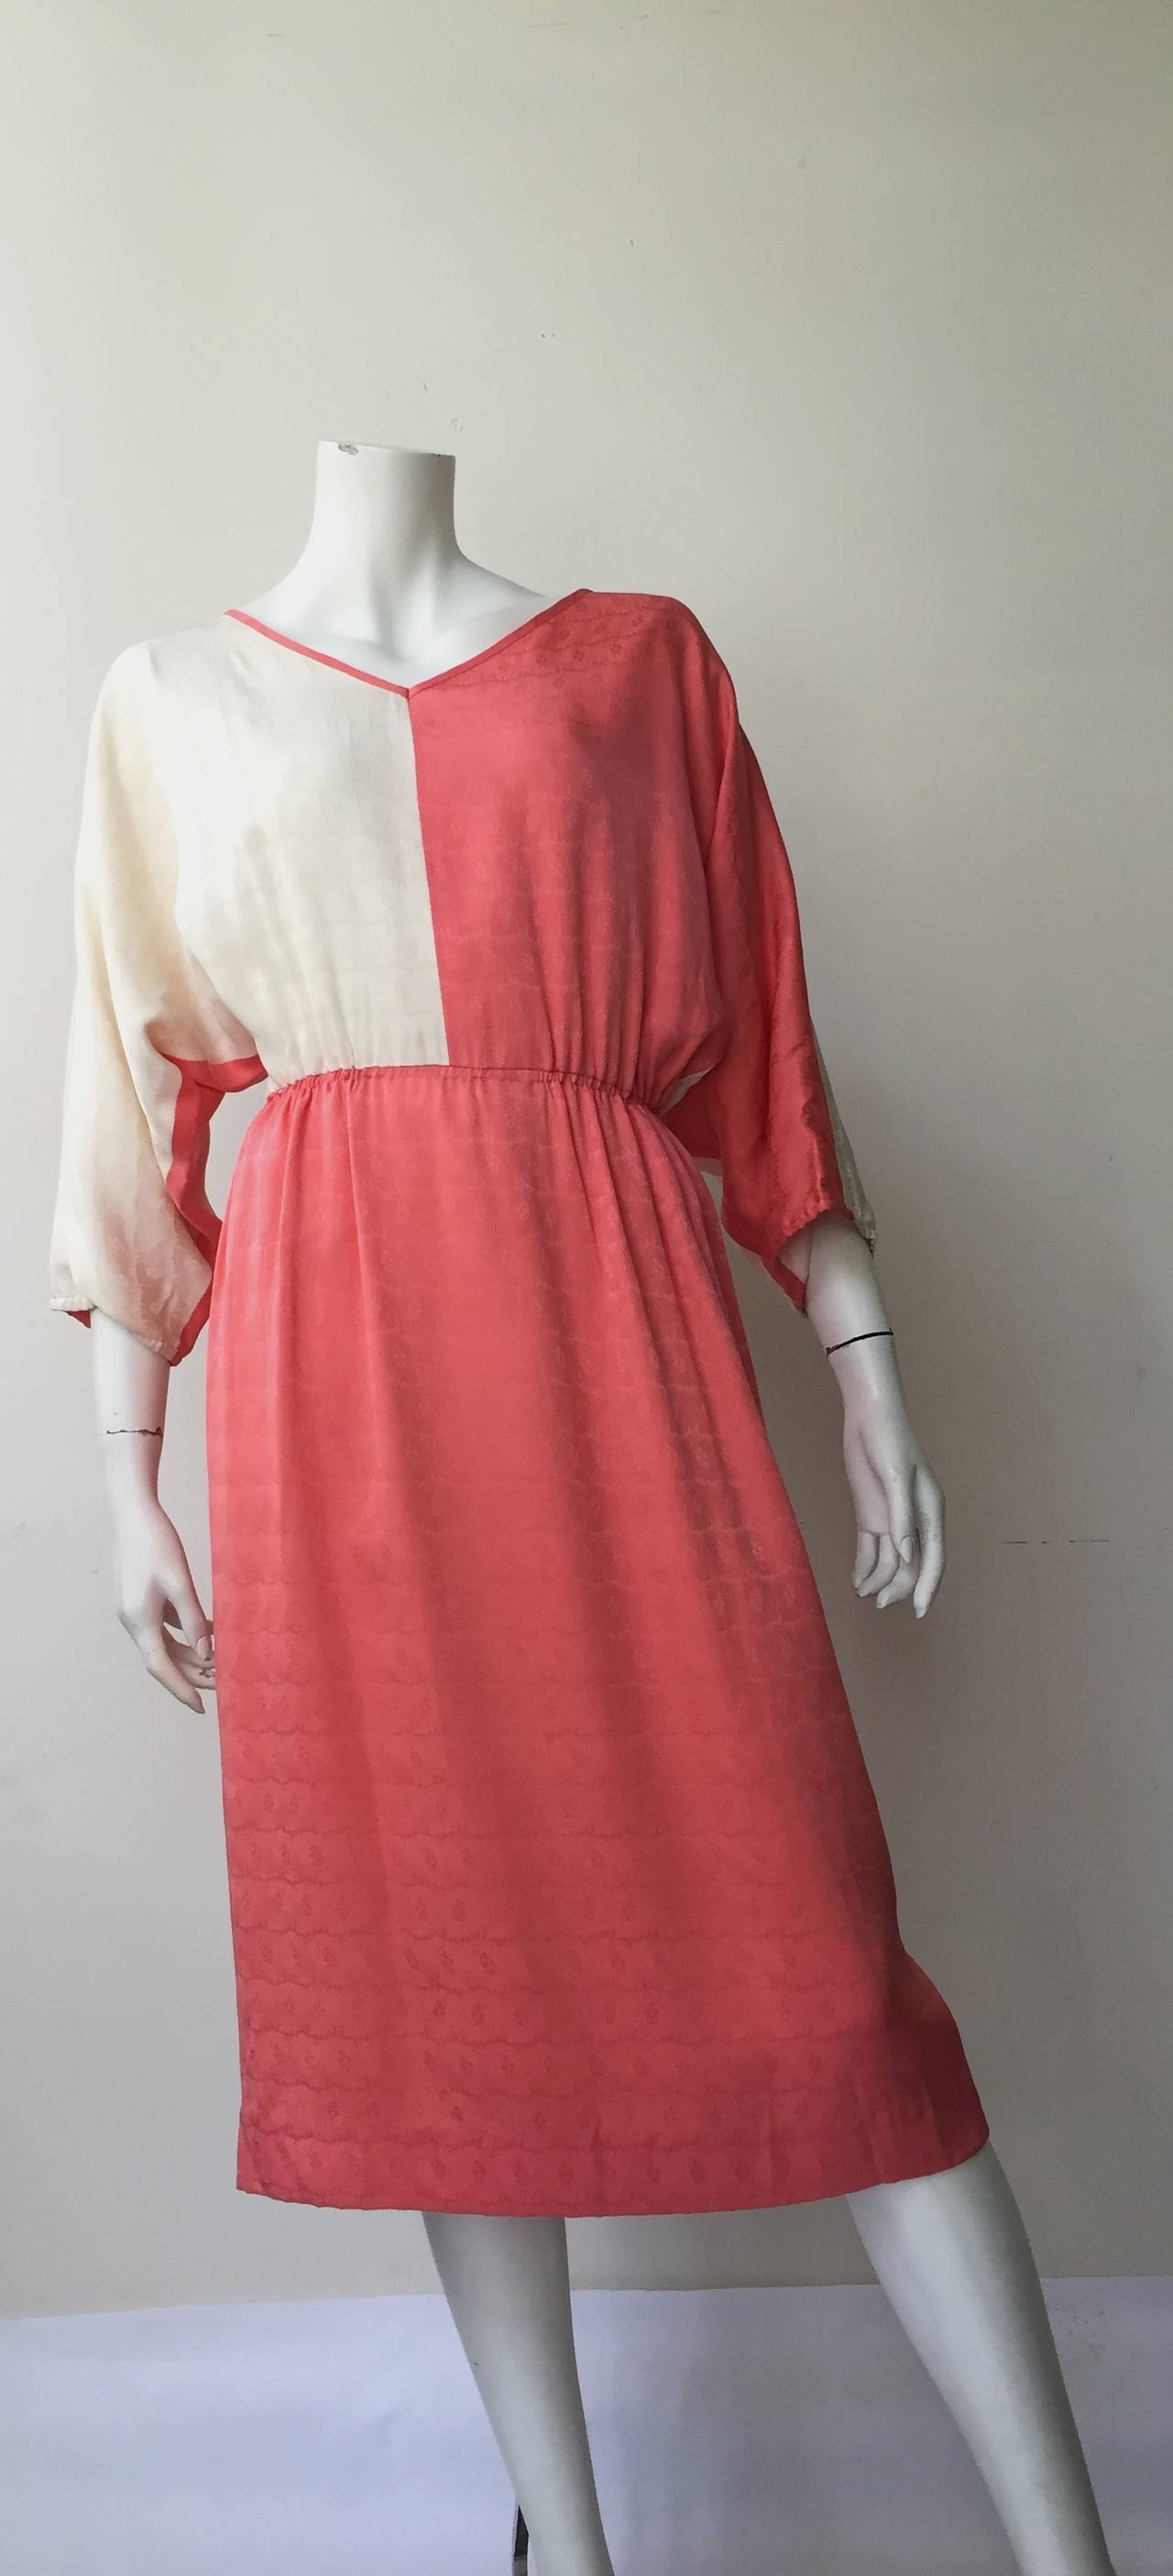 Mr. Blackwell Design 1950s coral & cream silk dress with dolman sleeves and elastic waist is a vintage size 14 but fits a modern USA size 8.  Ladies please use your measuring tape to properly measure your bust, waist & hips to make certain this will